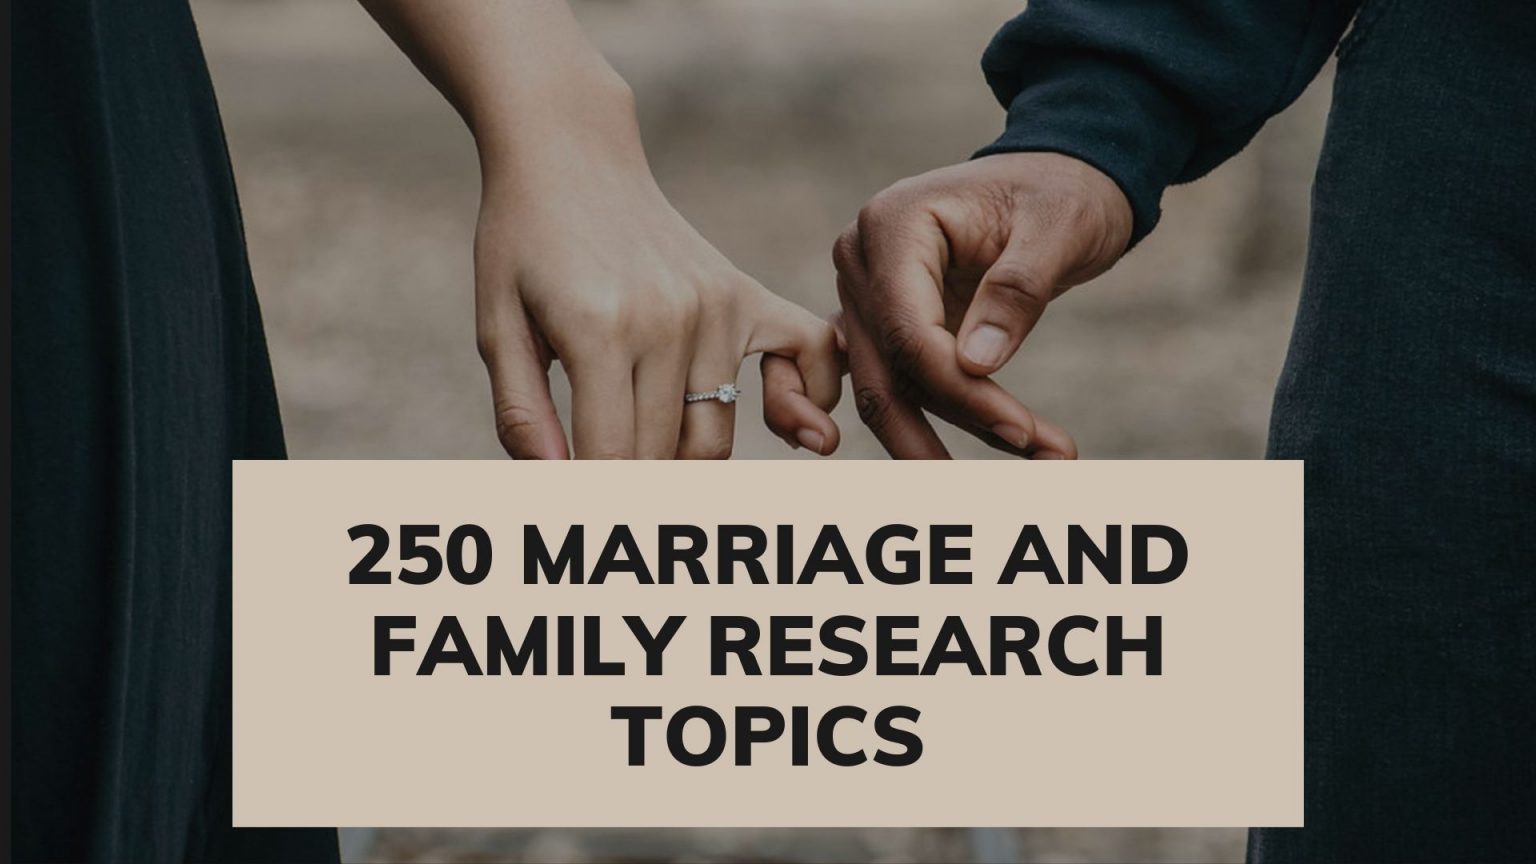 research topics of marriage